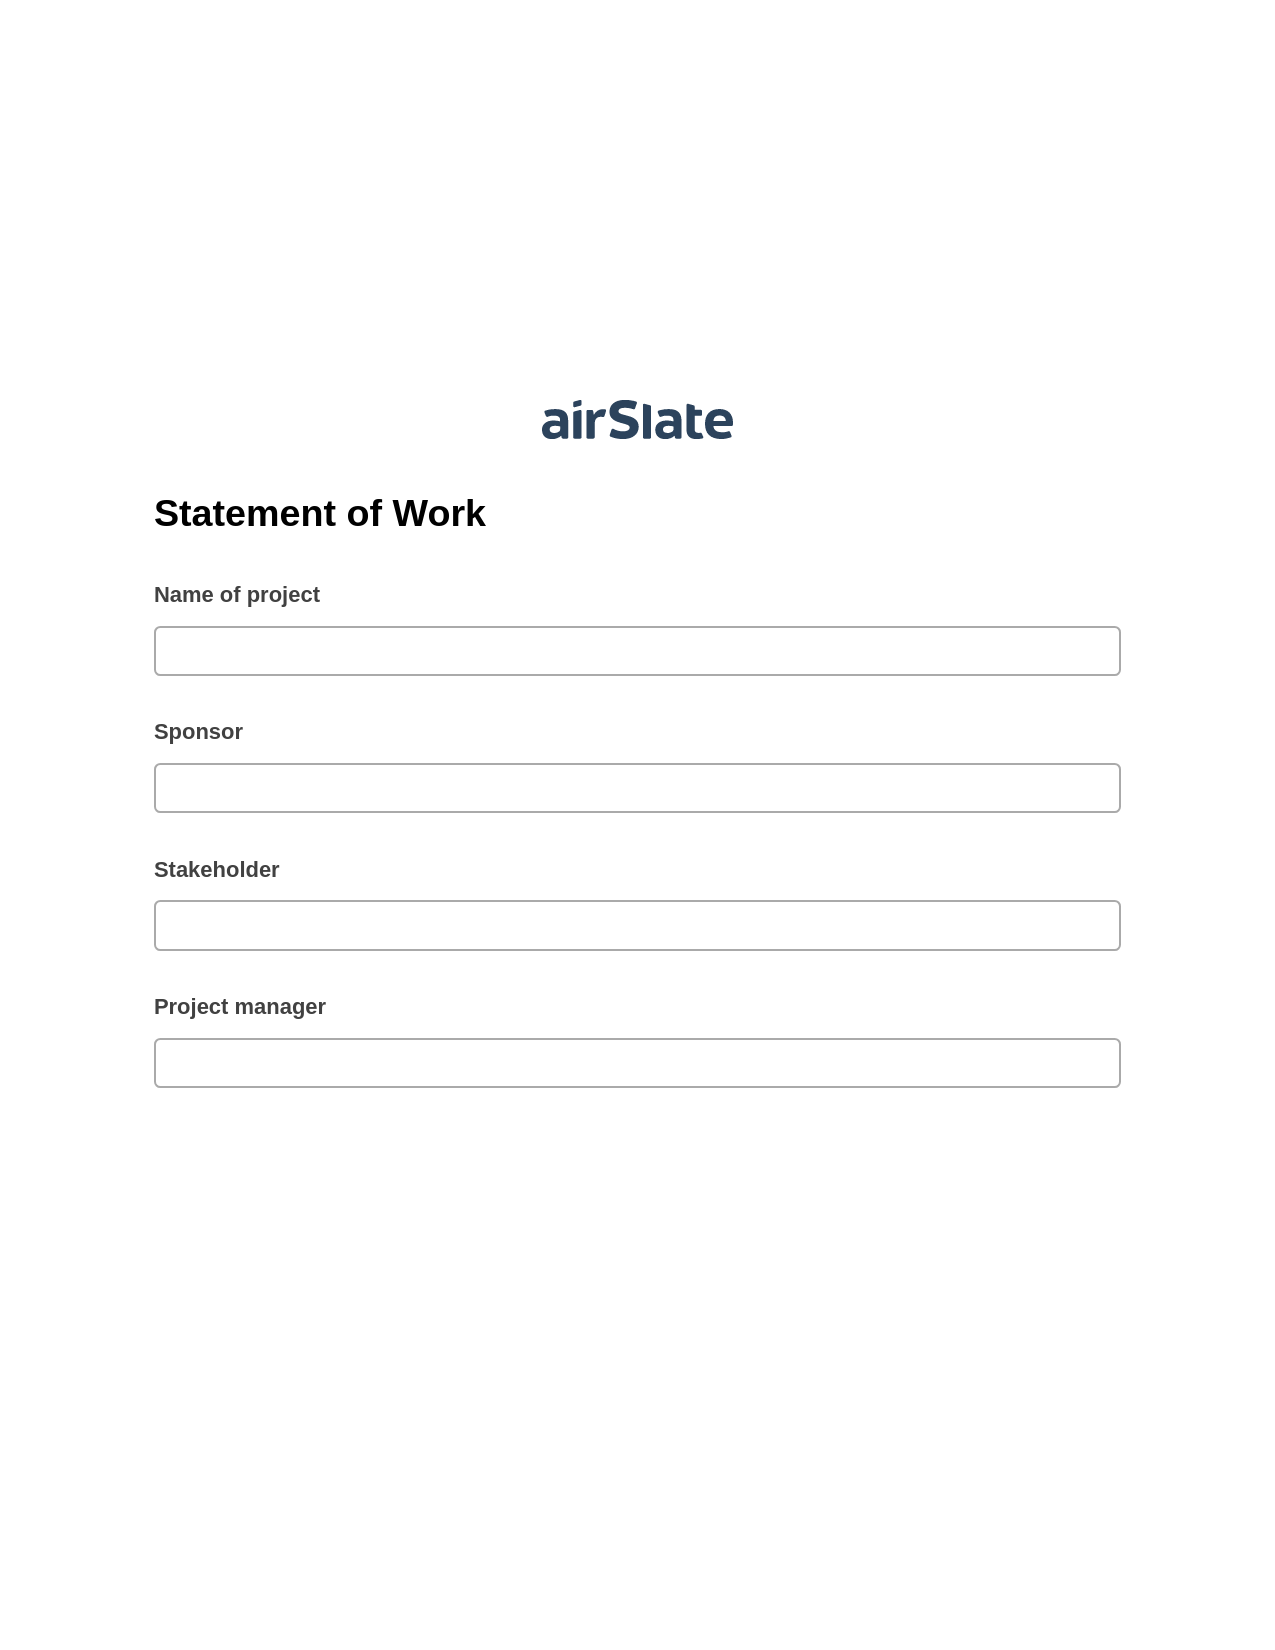 Multirole Statement of Work Pre-fill from Google Sheet Dropdown Options Bot, Create slate in another Flow Bot DEPRECATED, Export to Salesforce Bot